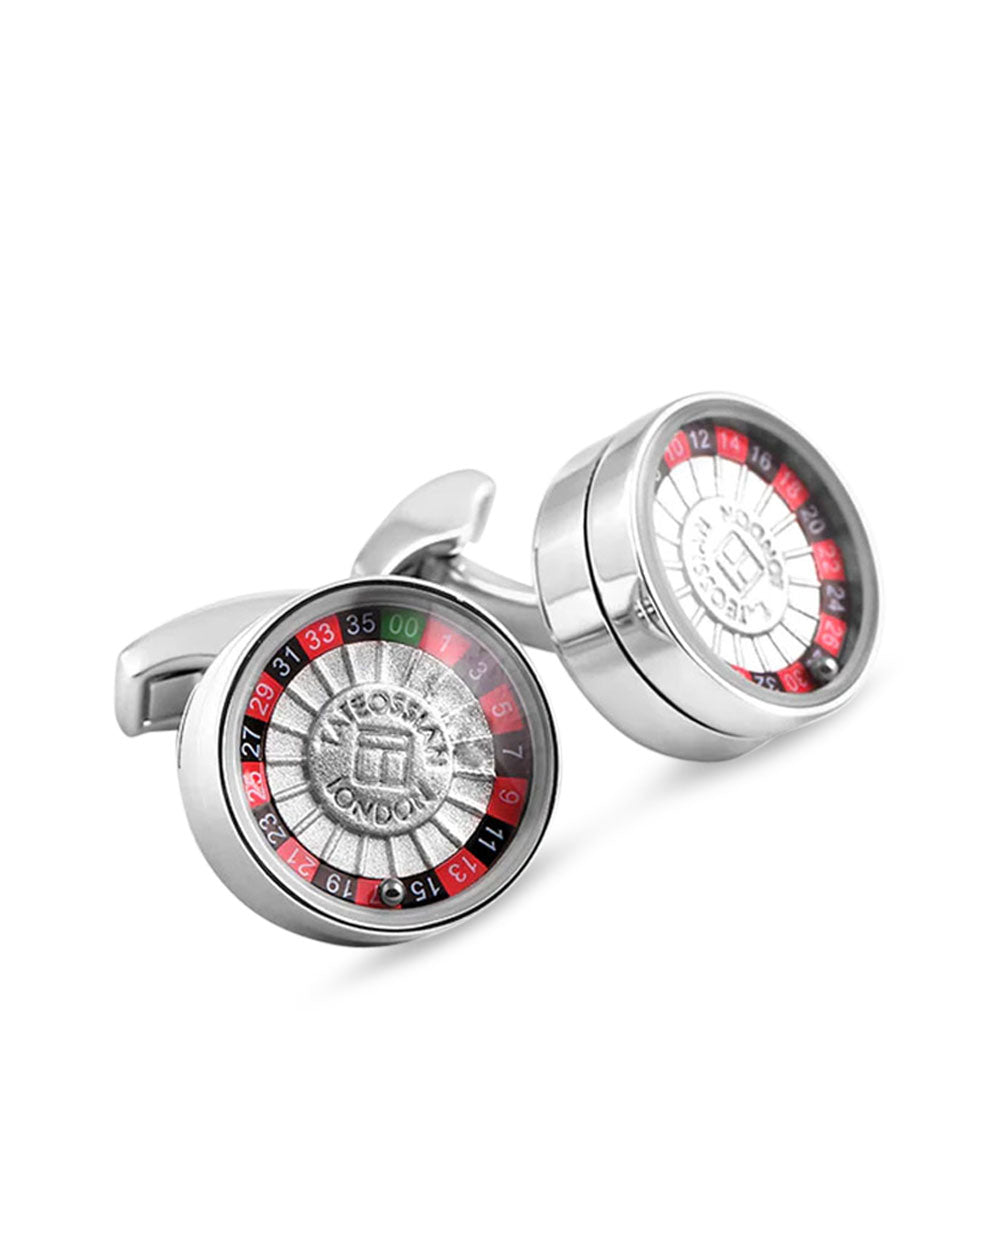 Silver Stainless Steel and Palladium Plated Metal Roulette Round Cufflinks